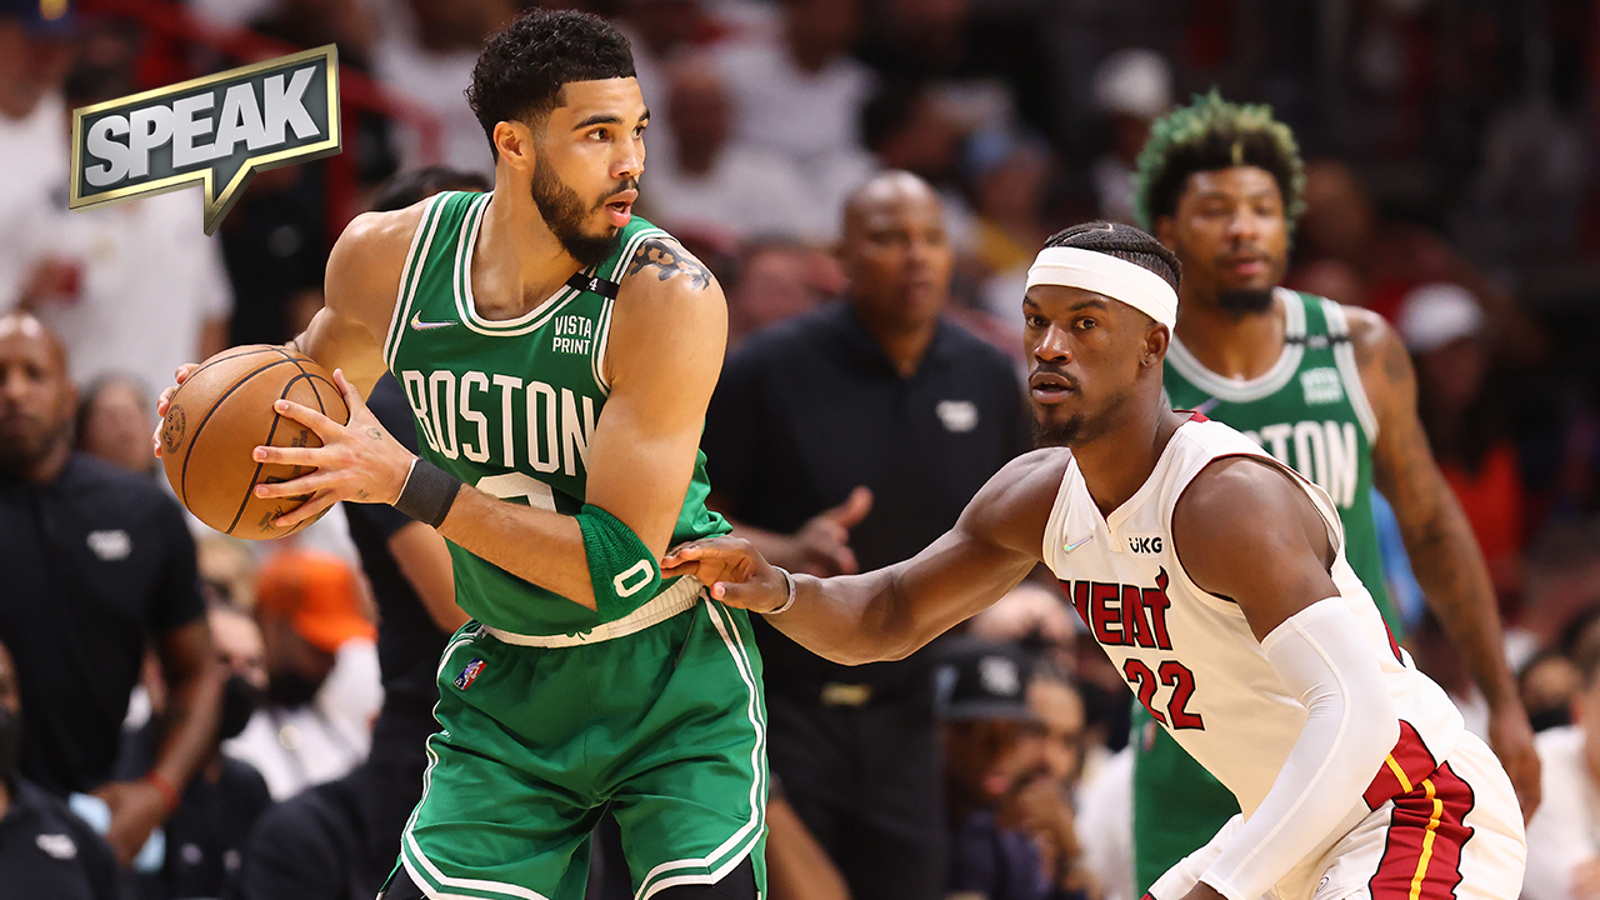 Jimmy Butler or Jayson Tatum: Who do you trust more?